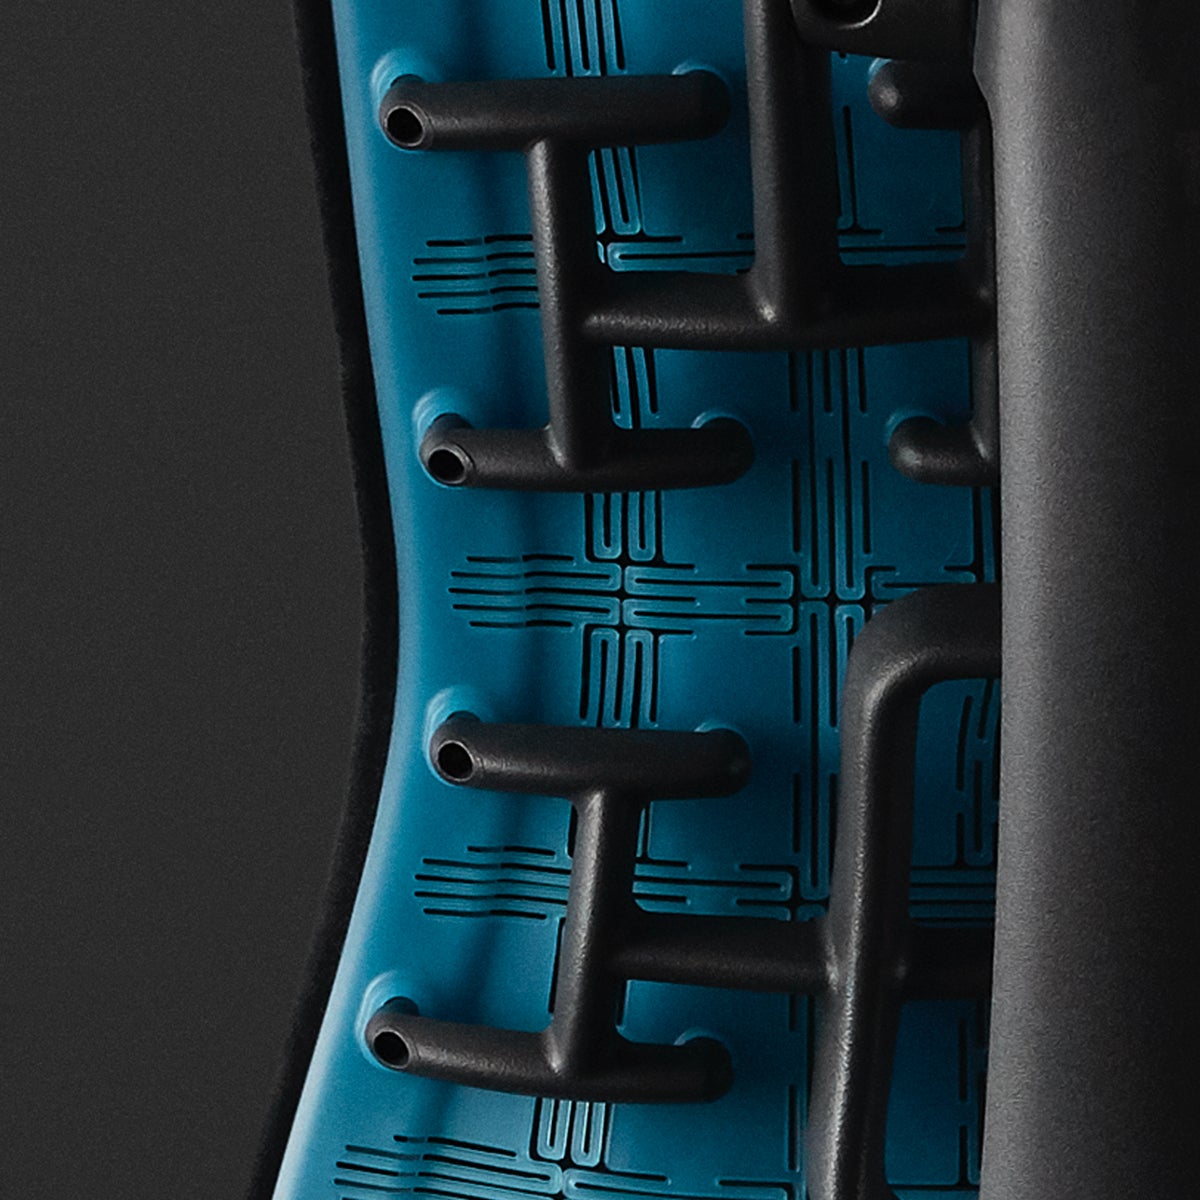 Embody Gaming Chair close-up of cyan matte back and spine with a black background.